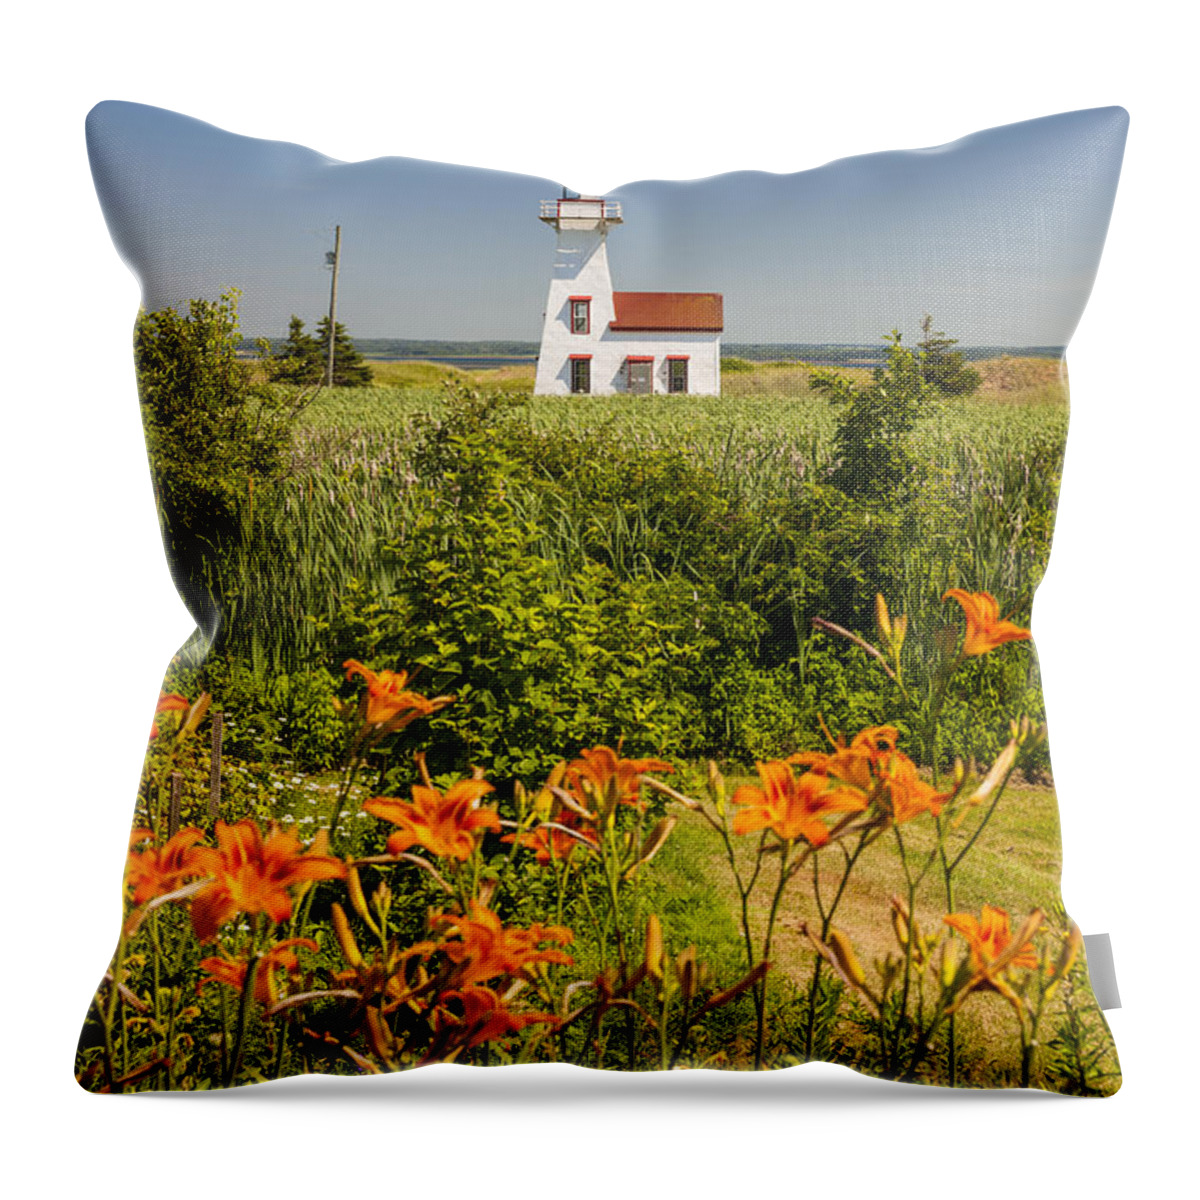 Lighthouse Throw Pillow featuring the photograph New London Range Rear Lighthouse 4 by Elena Elisseeva